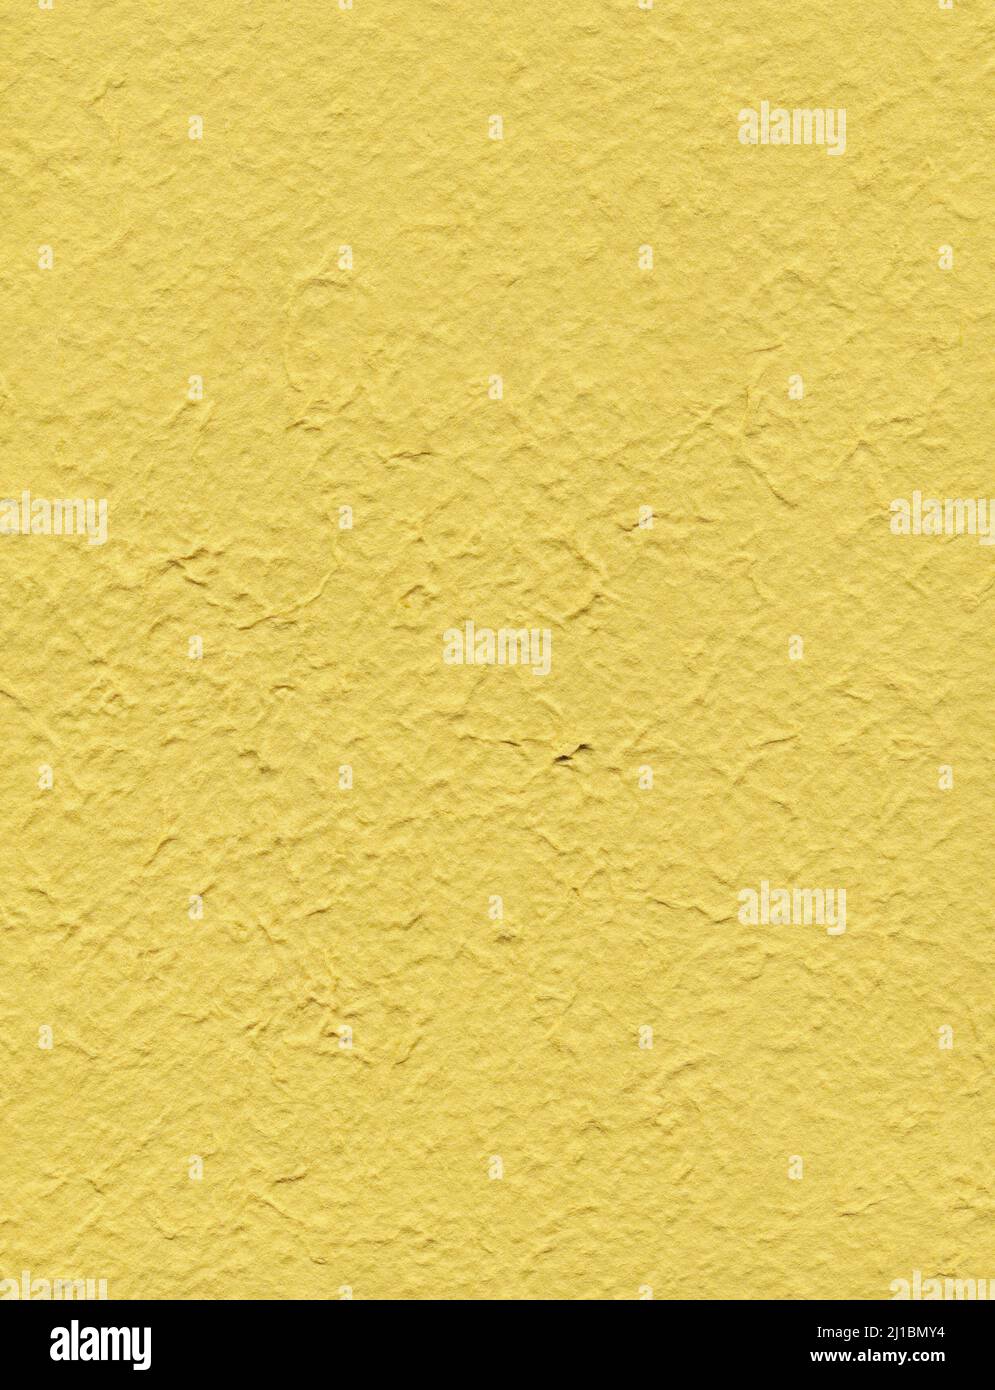 Yellow paper background with pattern Stock Photo